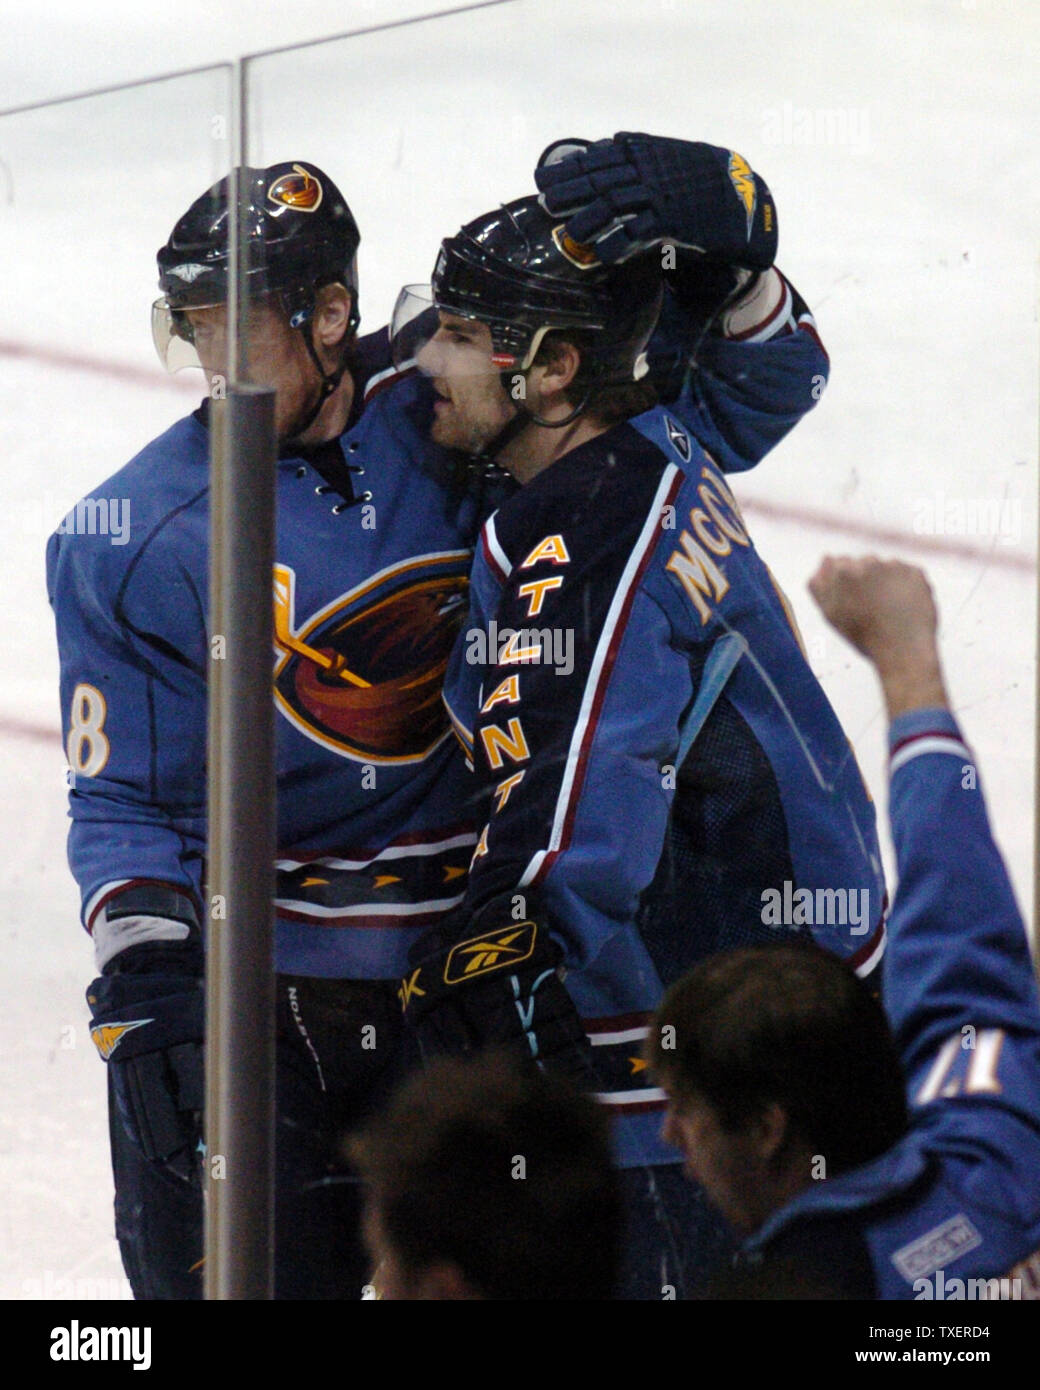 Atlanta Thrashers Marian Hossa (18), of Slovakia, congratulates teammate Steve McCarthy (5) for his goal against the visiting Tampa Bay Lightning in the first period at Philips Arena in Atlanta, February 22, 2007. (UPI Photo/John Dickerson) Stock Photo